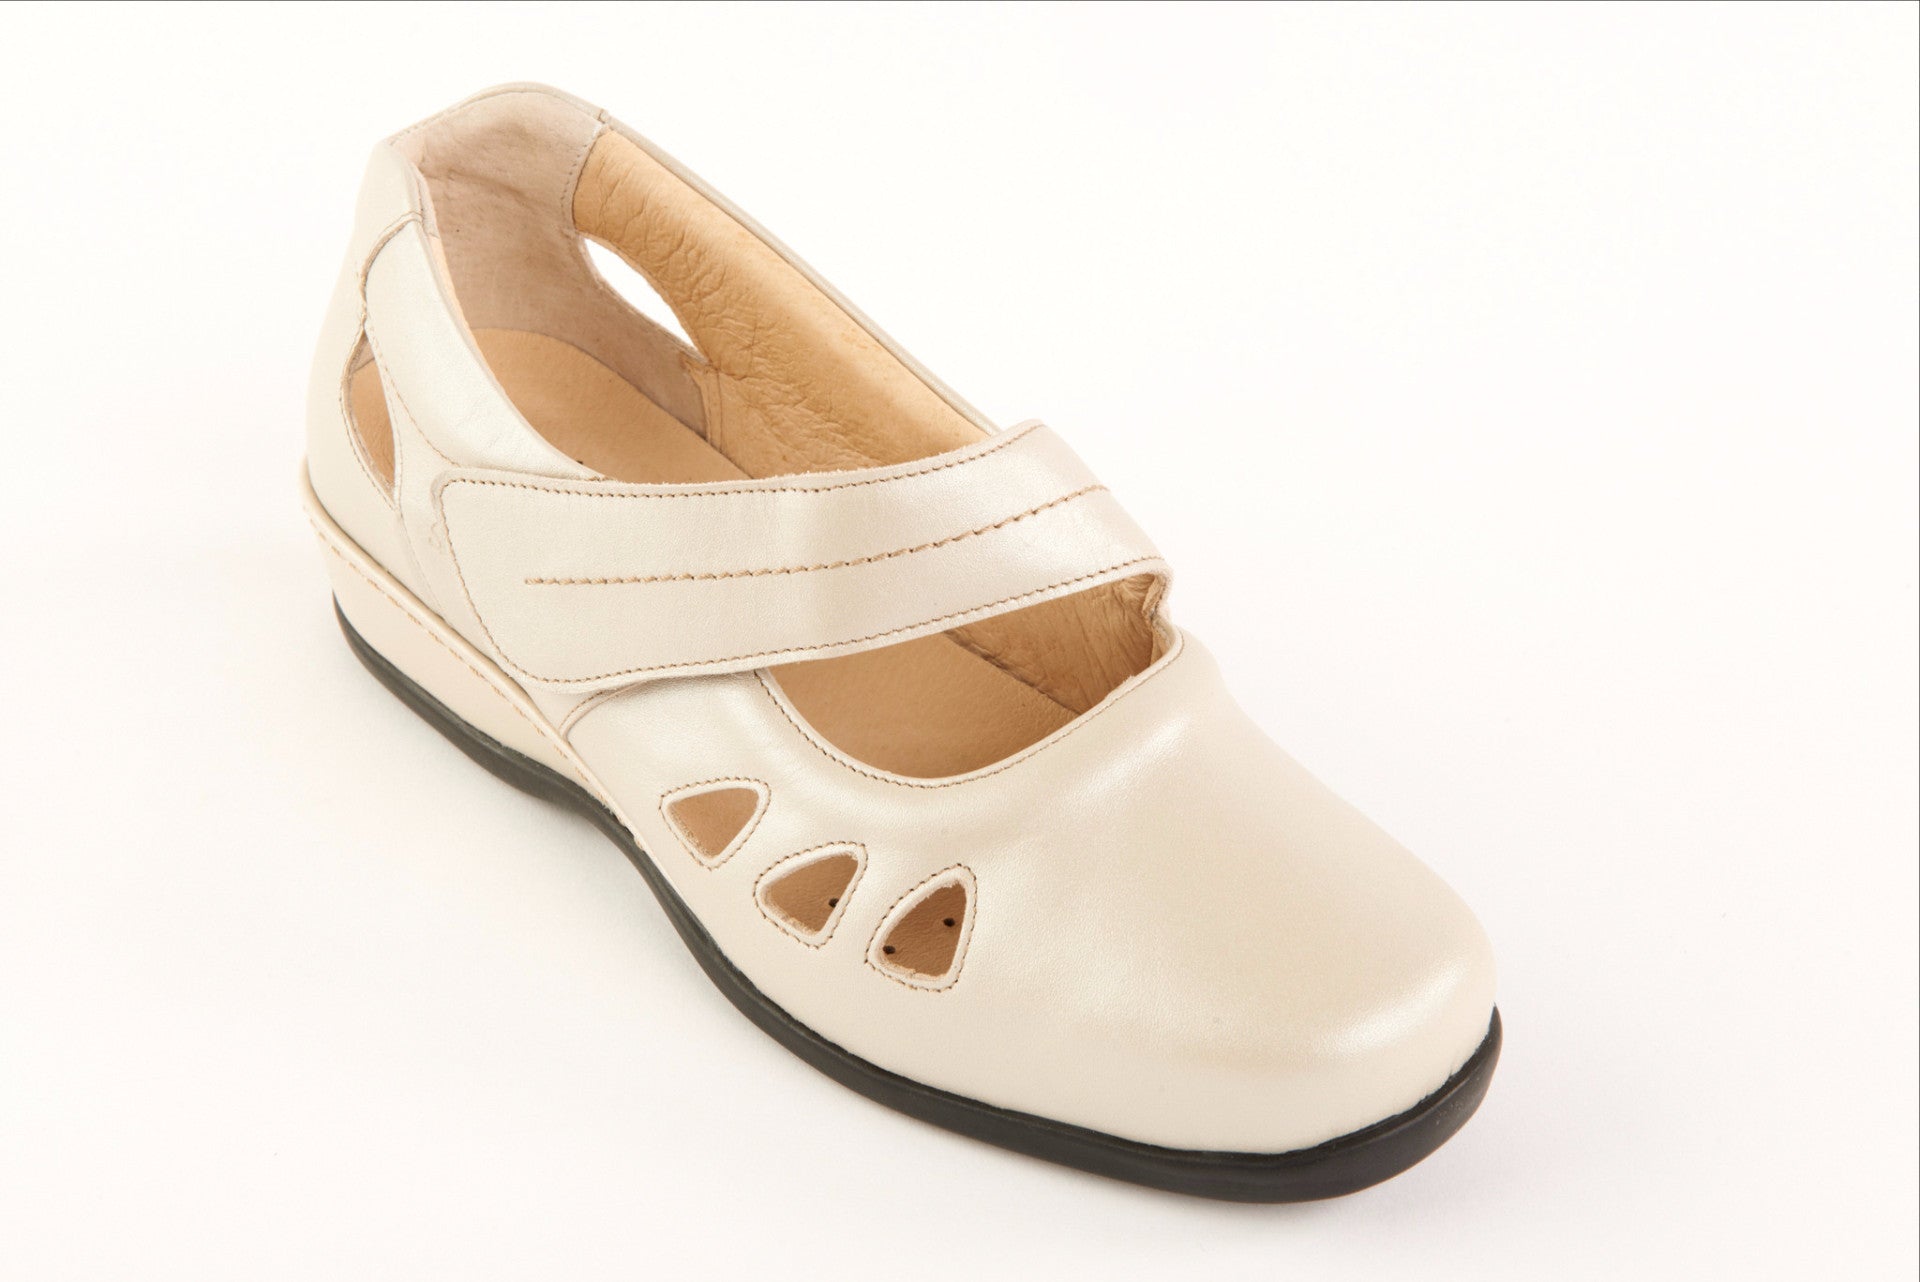 stylish wide fitting shoes